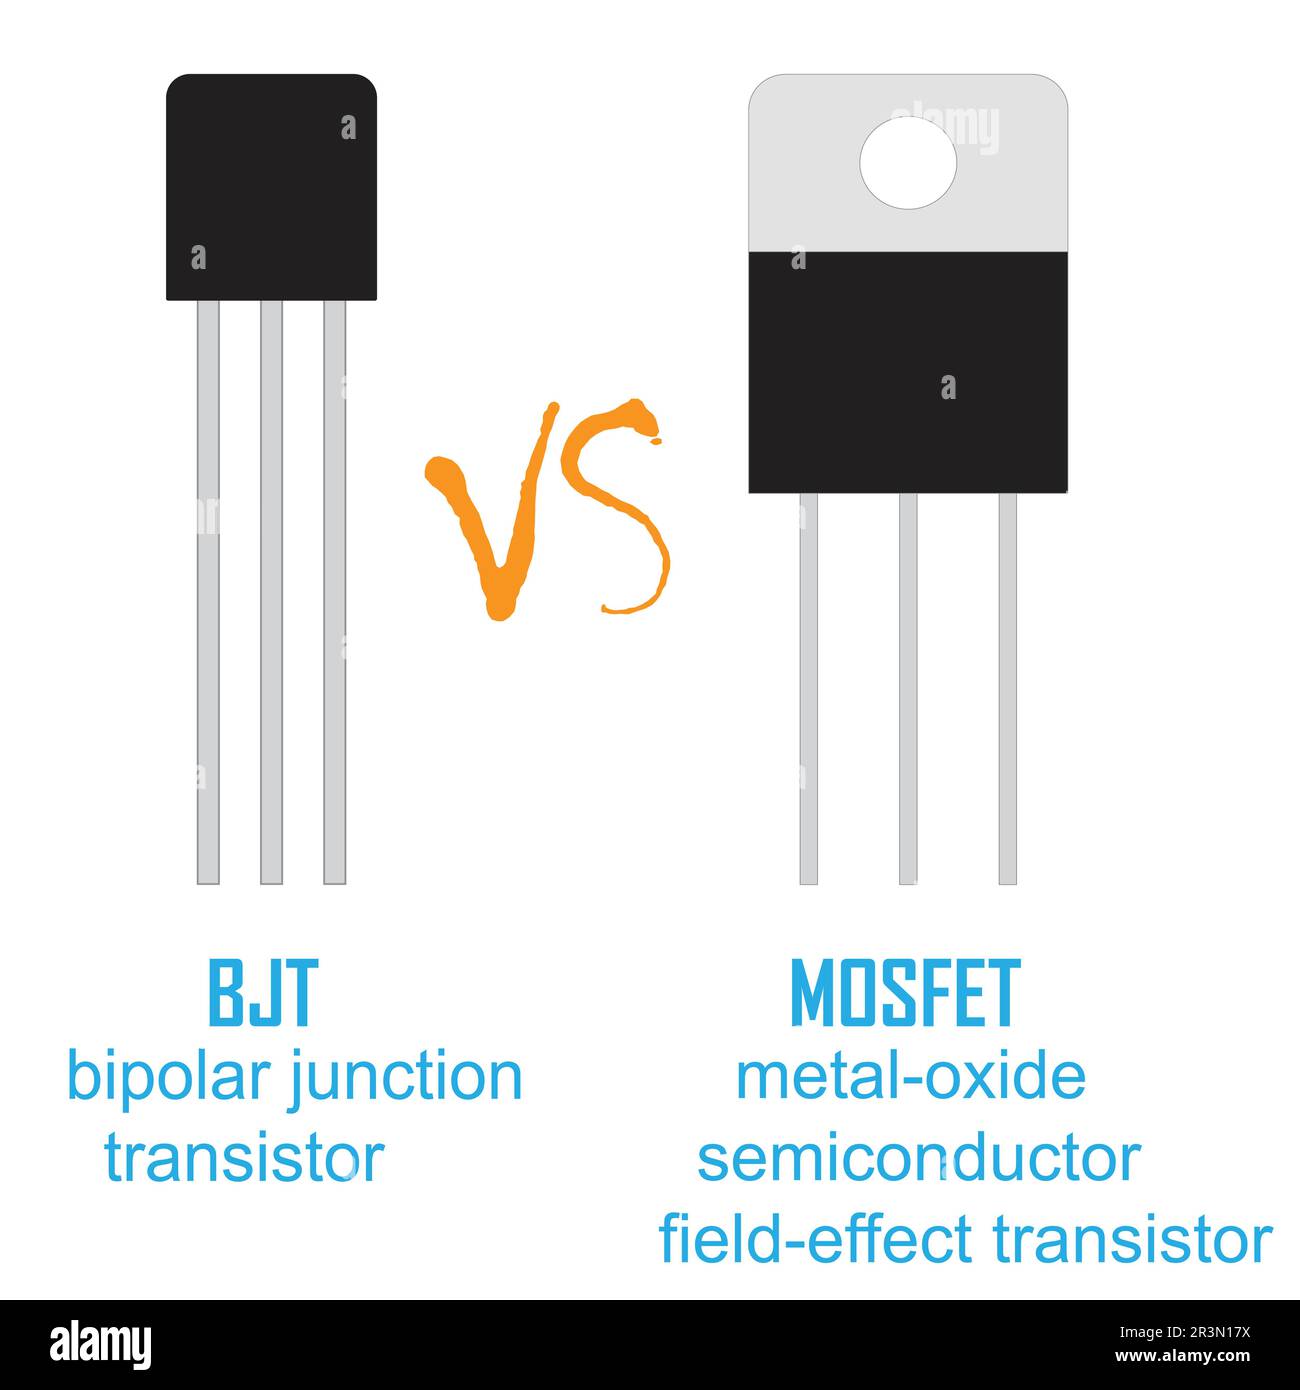 Mosfet semiconductor transistor technology Banque de photographies